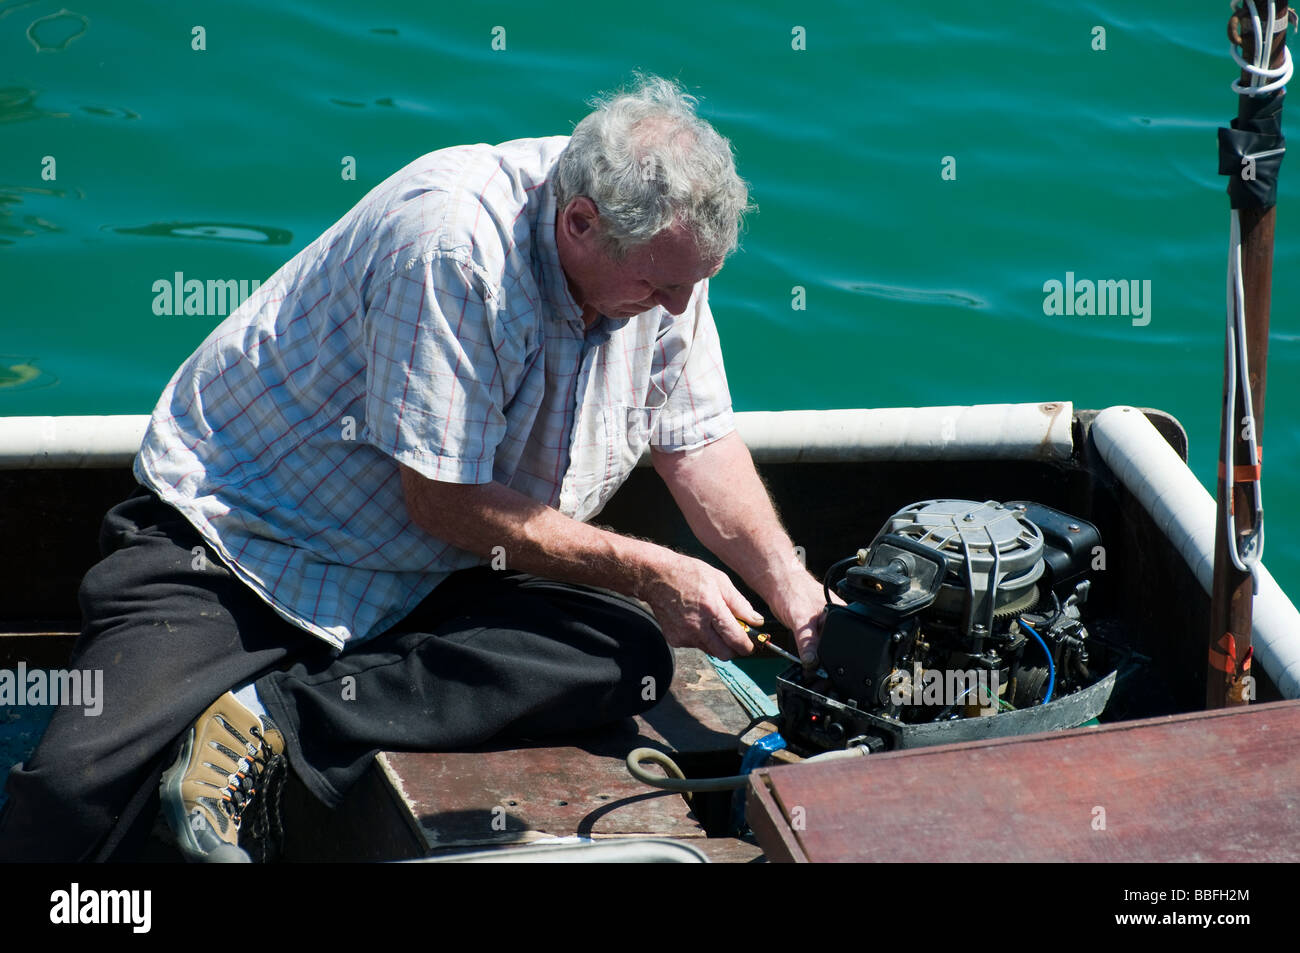 A fisherman repairing the outboard engine on his small fishing boat. Stock Photo